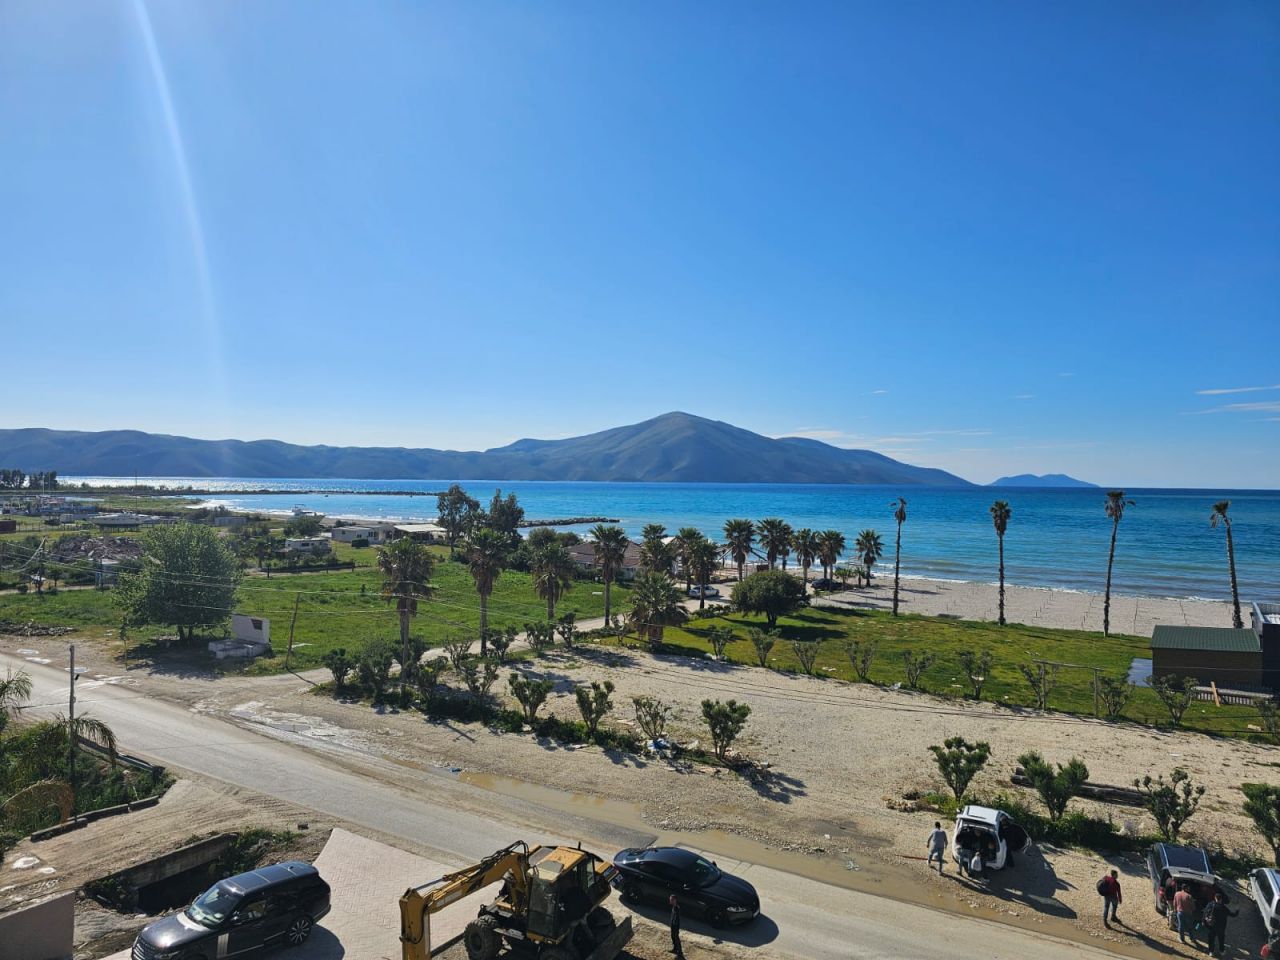 Apartment For Sale In Vlora Albania, Located In A Good Area, Just A Few Steps Away From The Beach